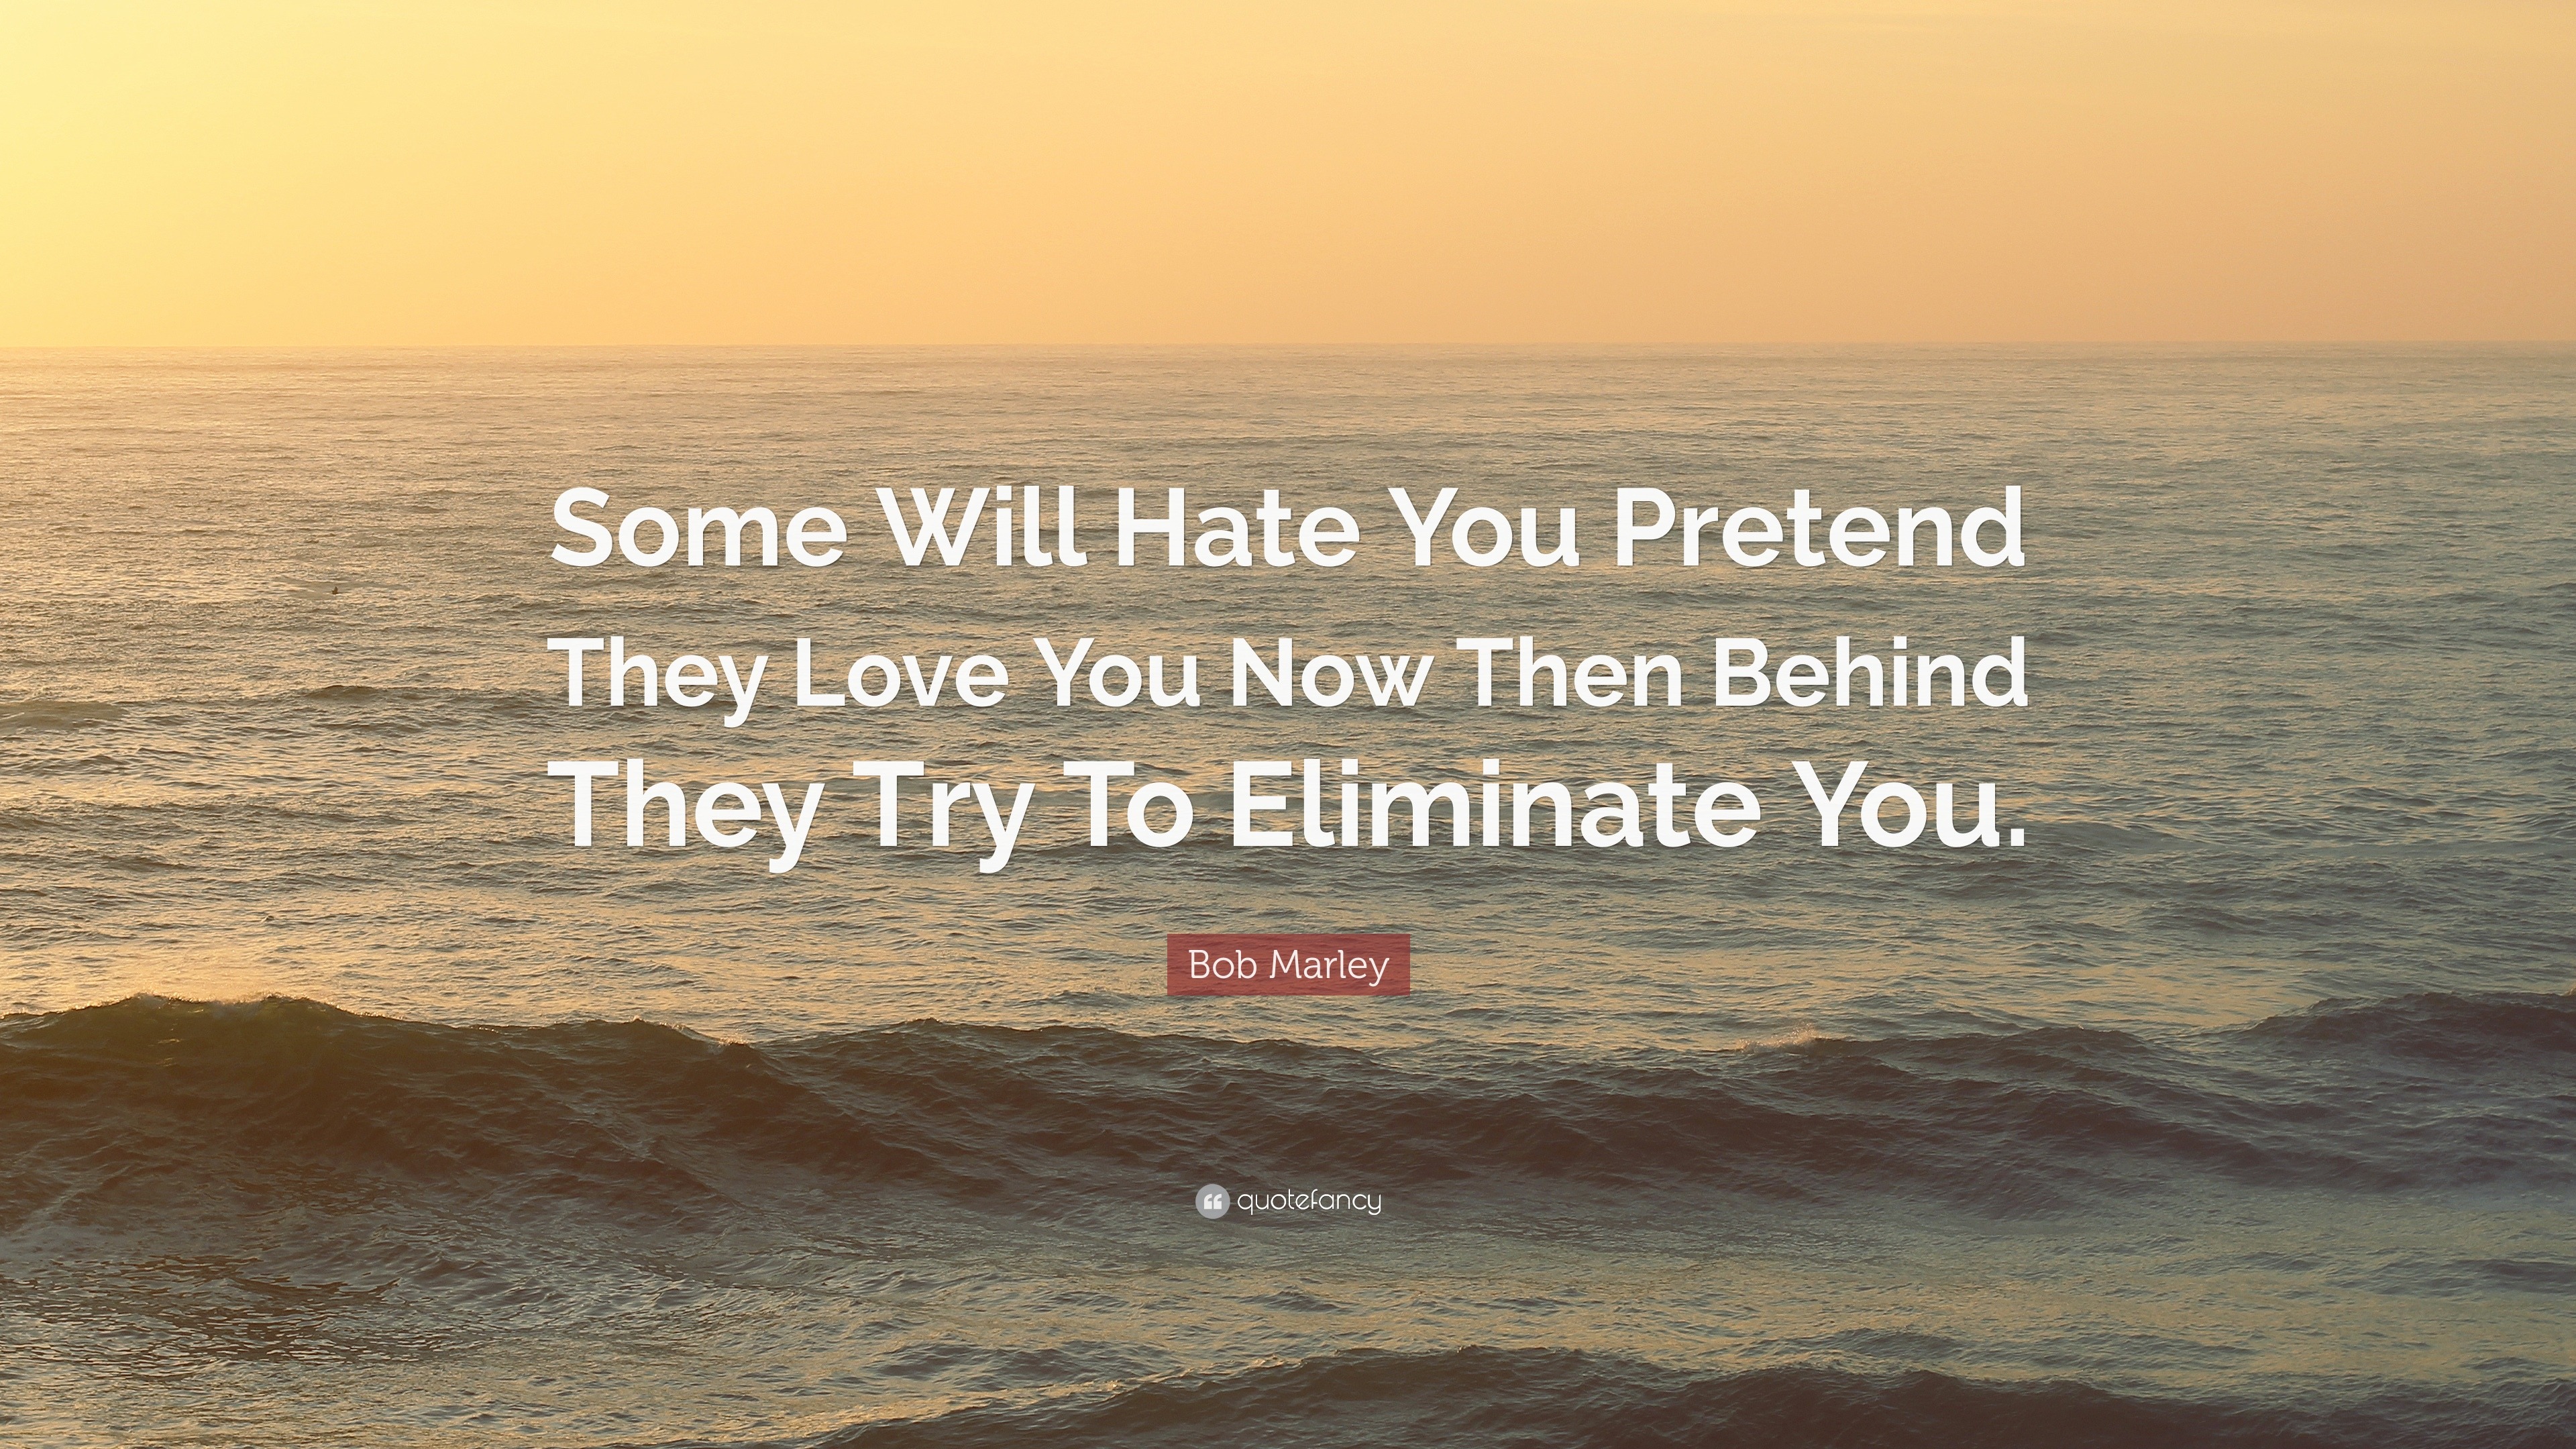 Bob Marley Quote “Some Will Hate You Pretend They Love You Now Then Behind